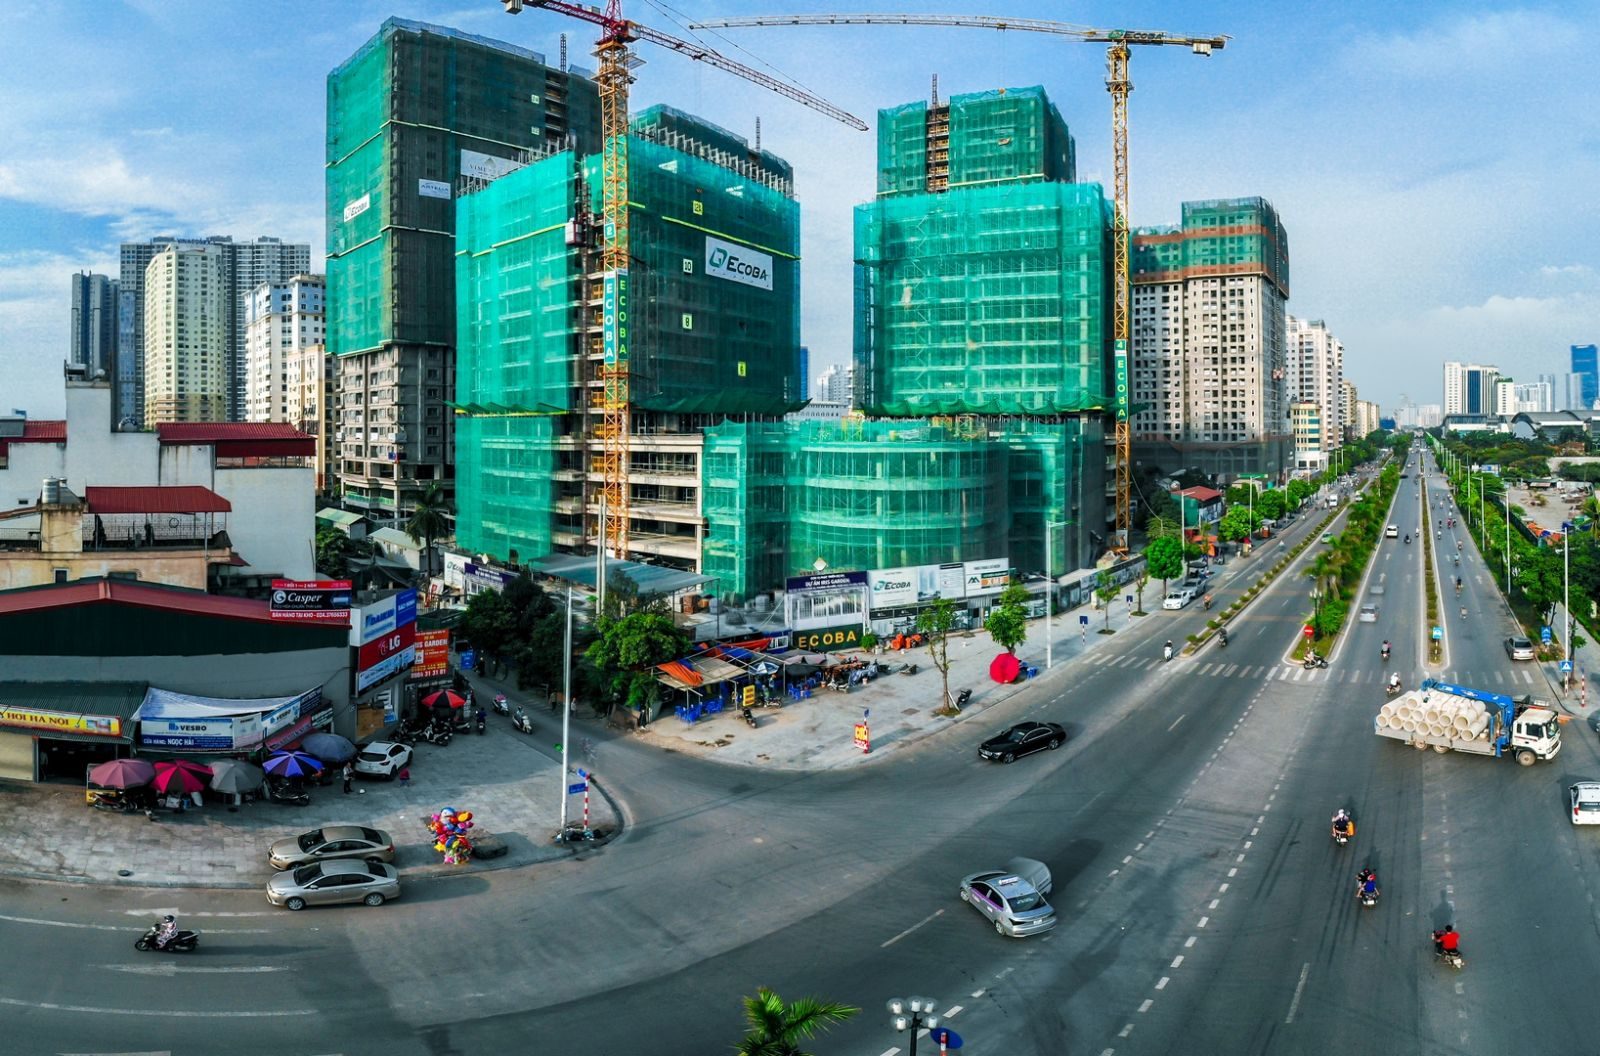 Japanese property group Haseko buys 36% of Vietnam-based construction firm Ecoba